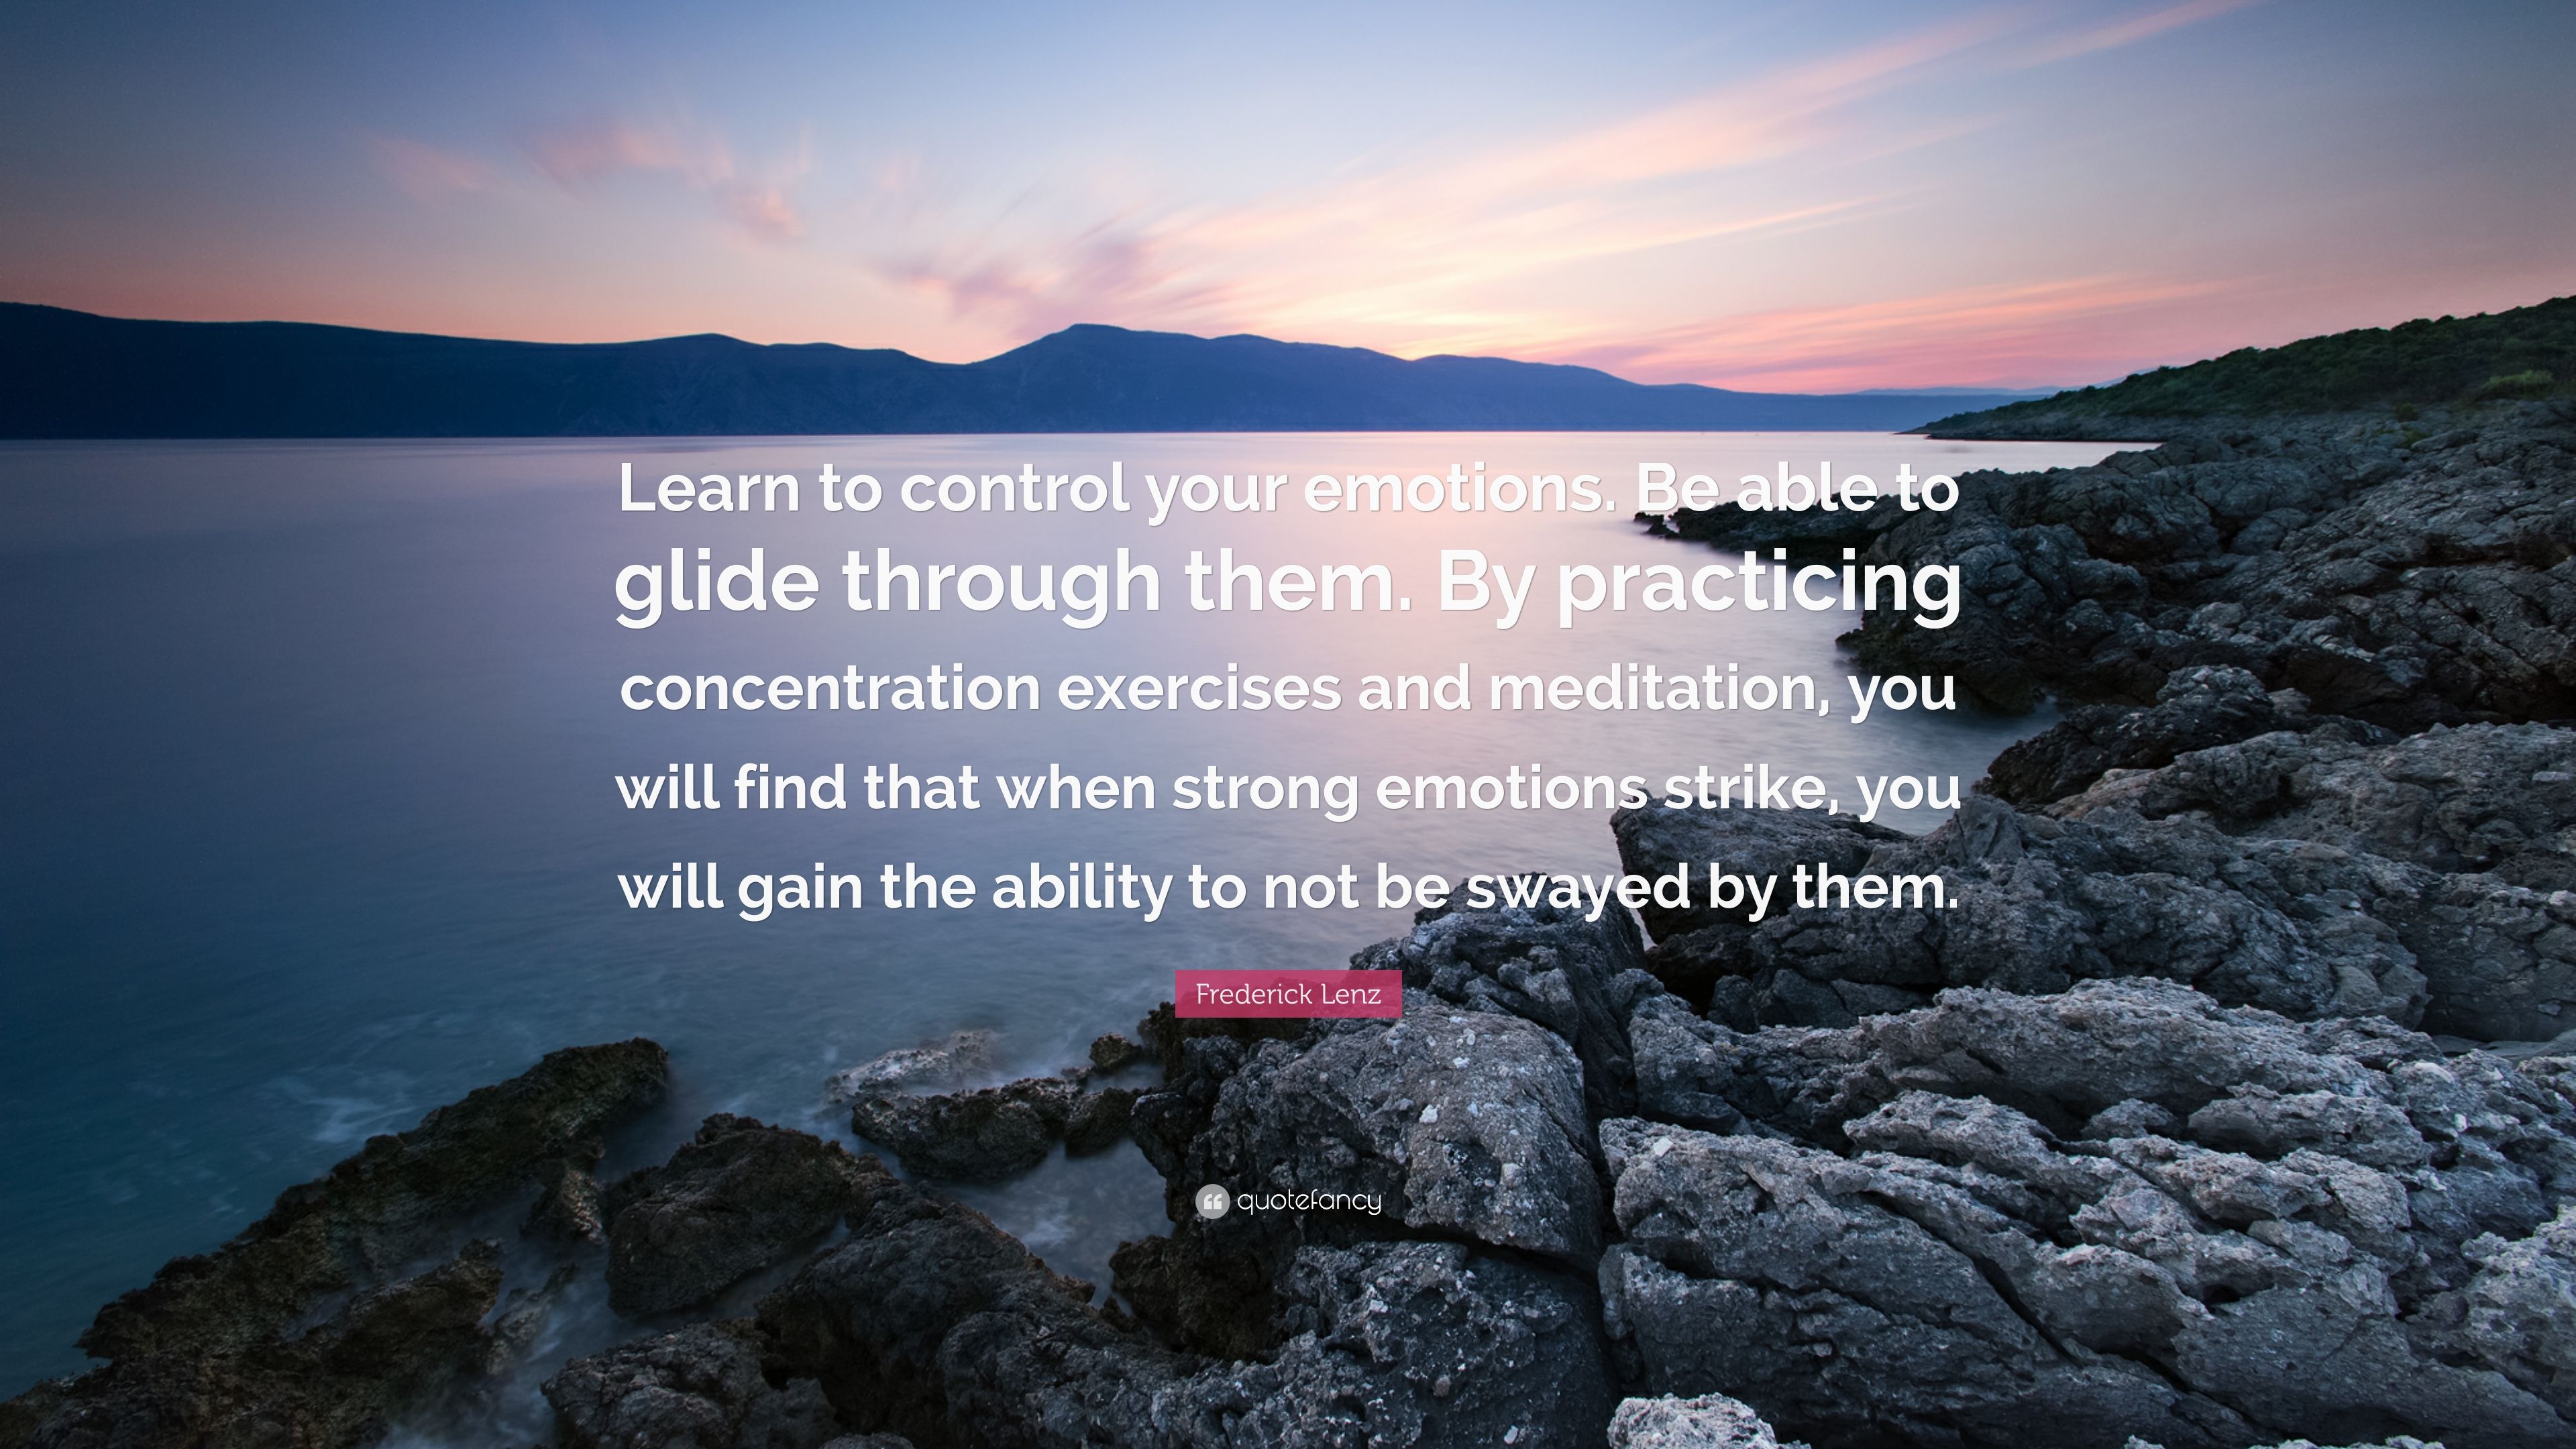 Frederick Lenz Quote: “Learn to control your emotions. Be able to glide through them. By practicing concentration exercises and meditation, you.” (7 wallpaper)